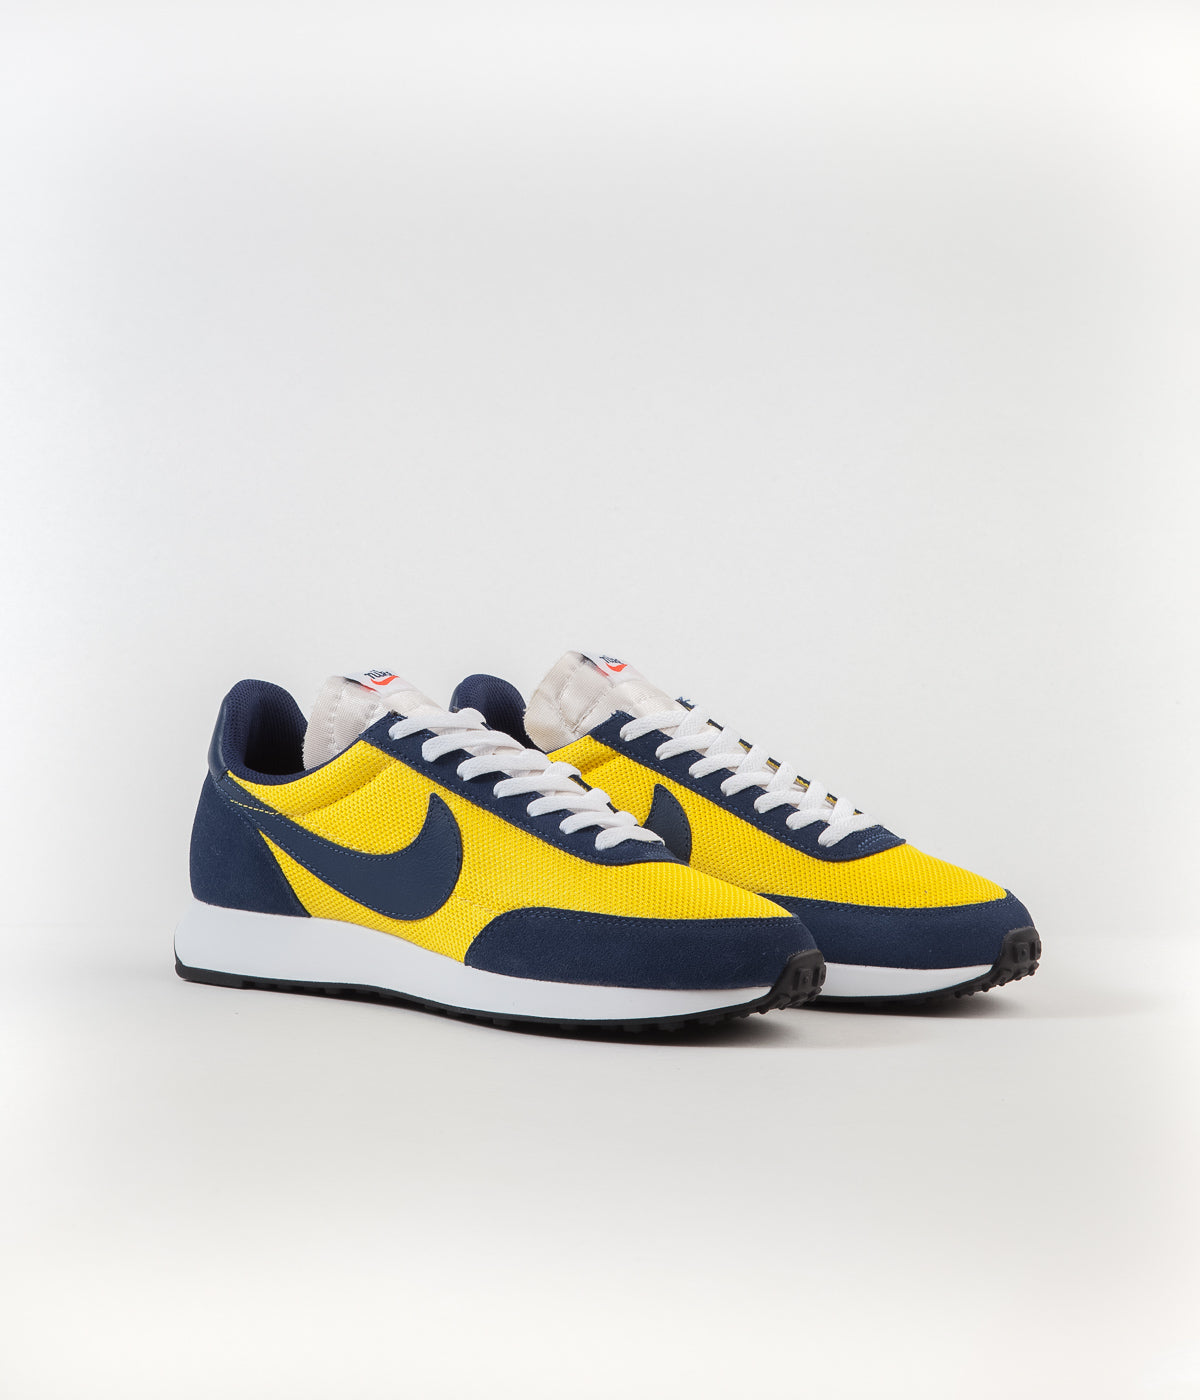 Nike Air Tailwind 79 Shoes - Speed 